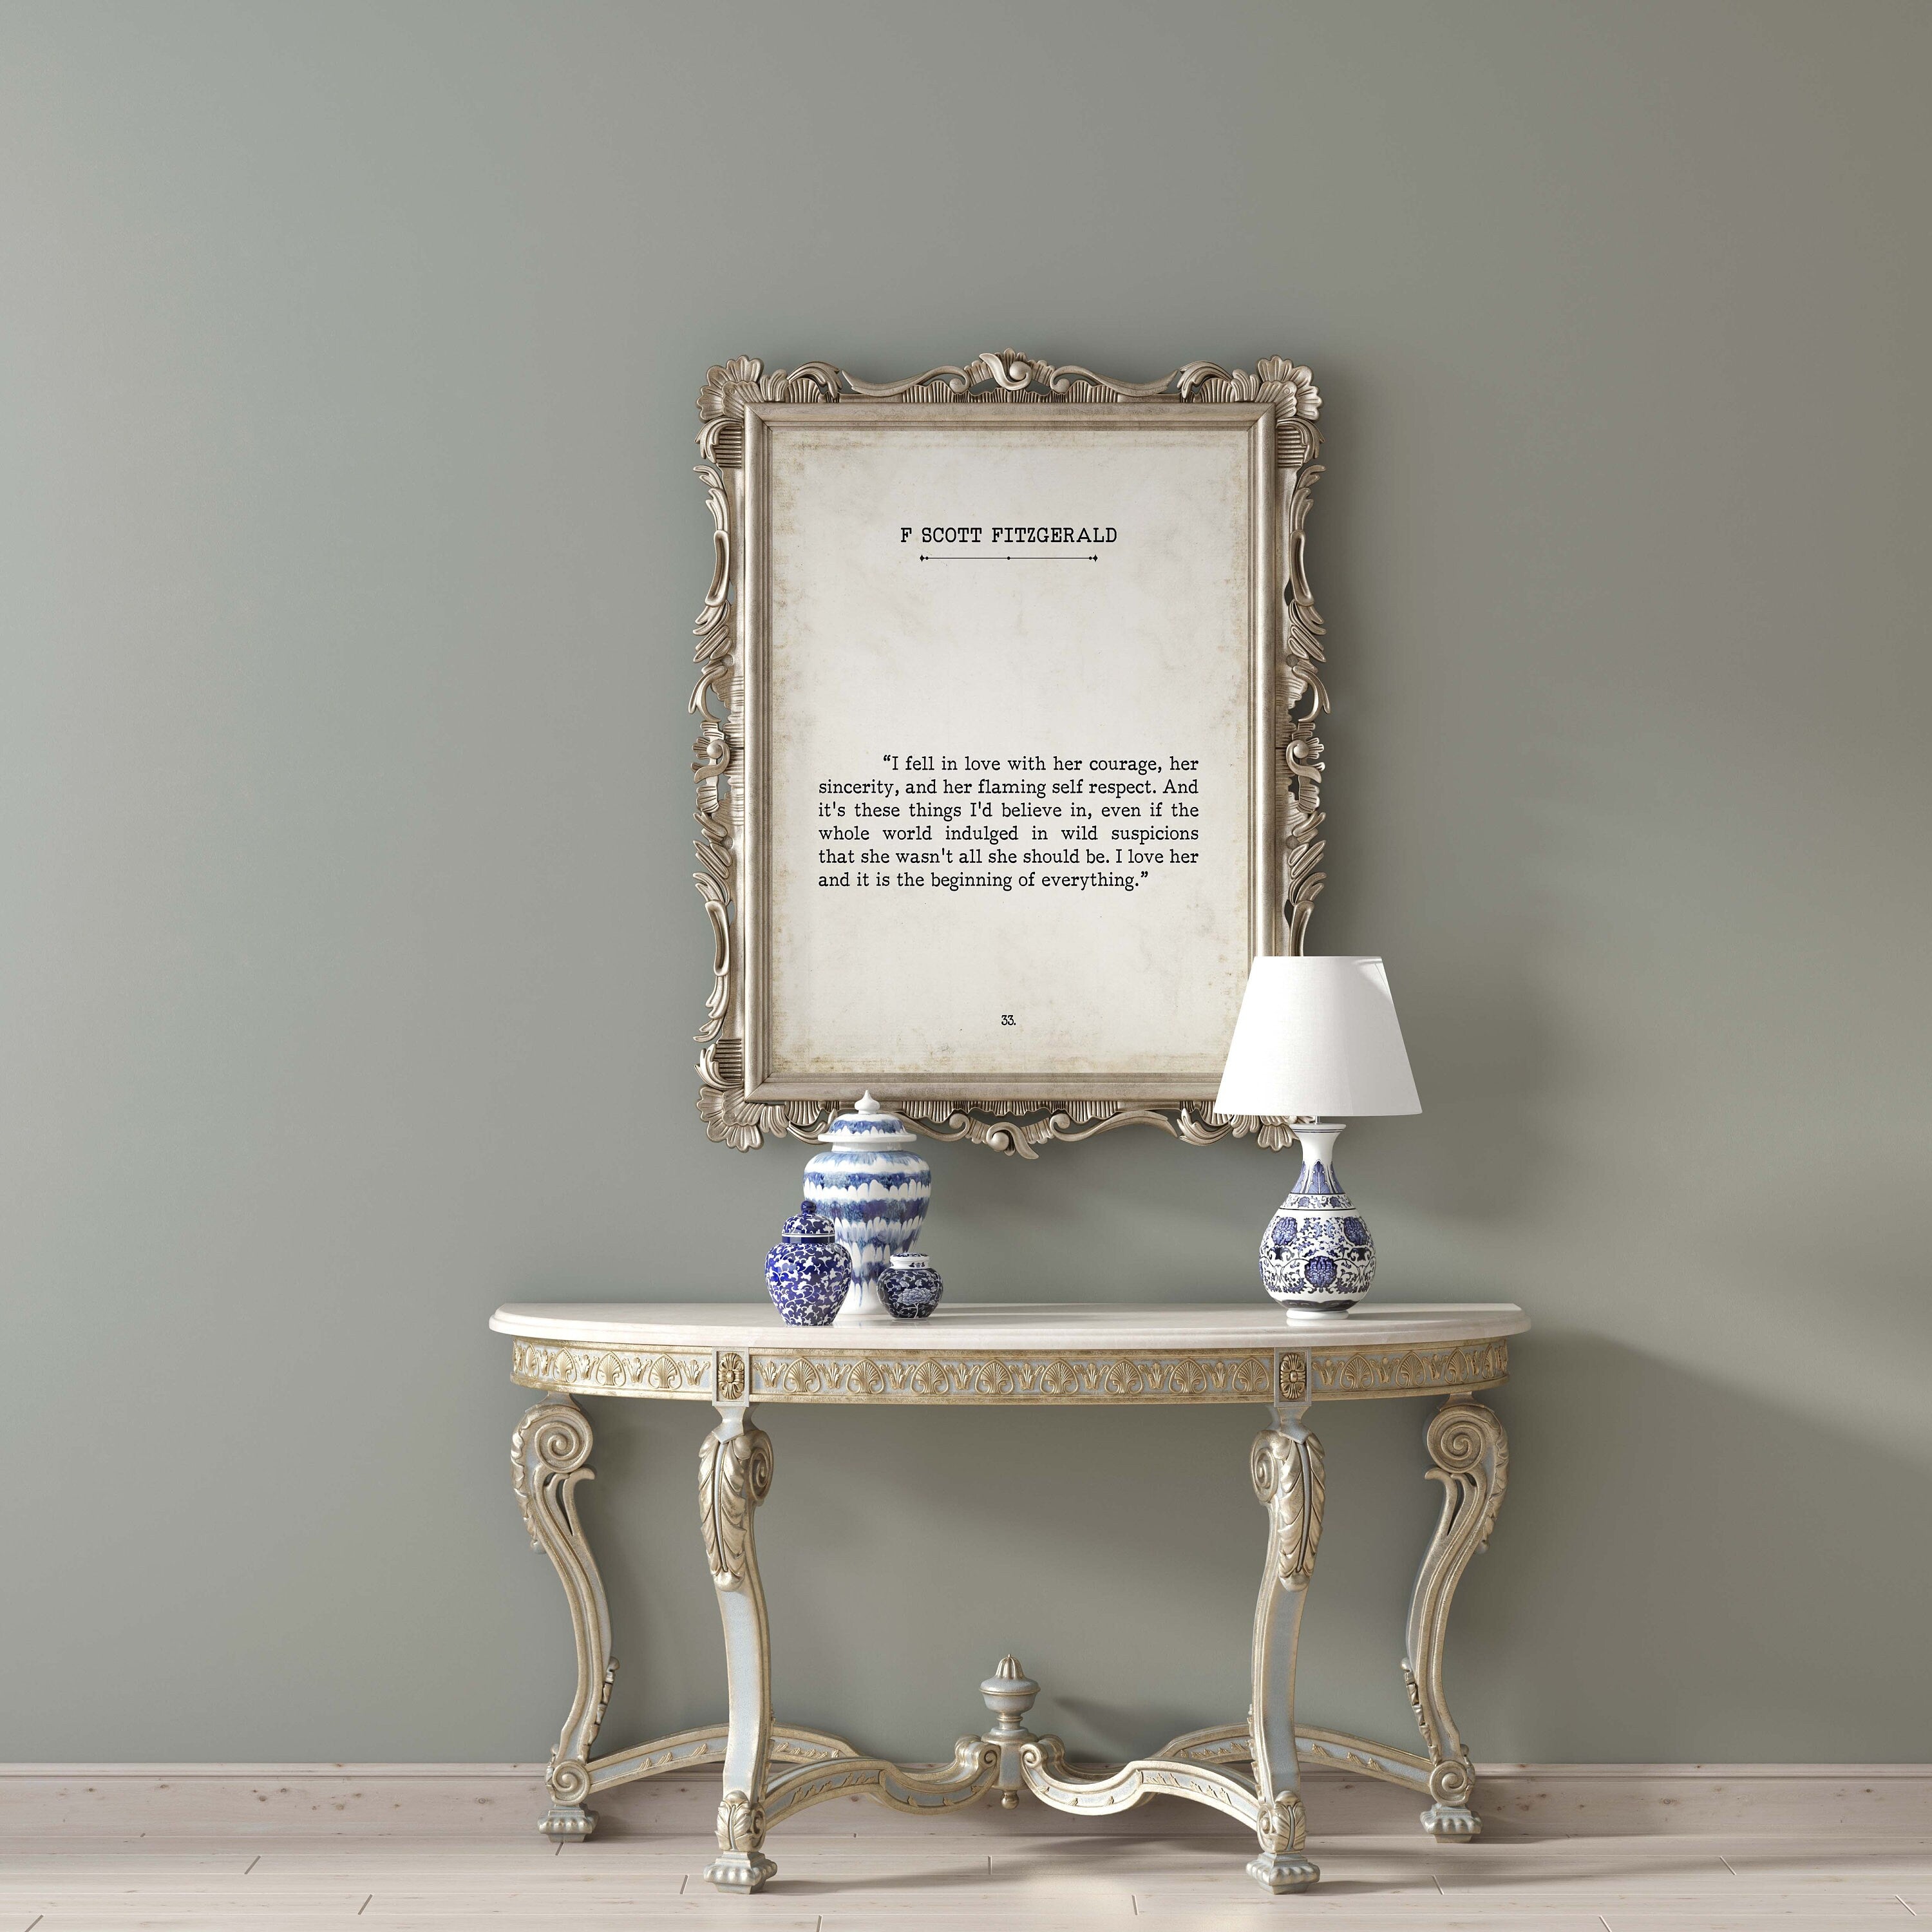 I Love Her FS Fitzgerald Book Page Inspirational Wall Art, Unframed Vintage Style Print Wall Decor I Fell In Love With Her Courage